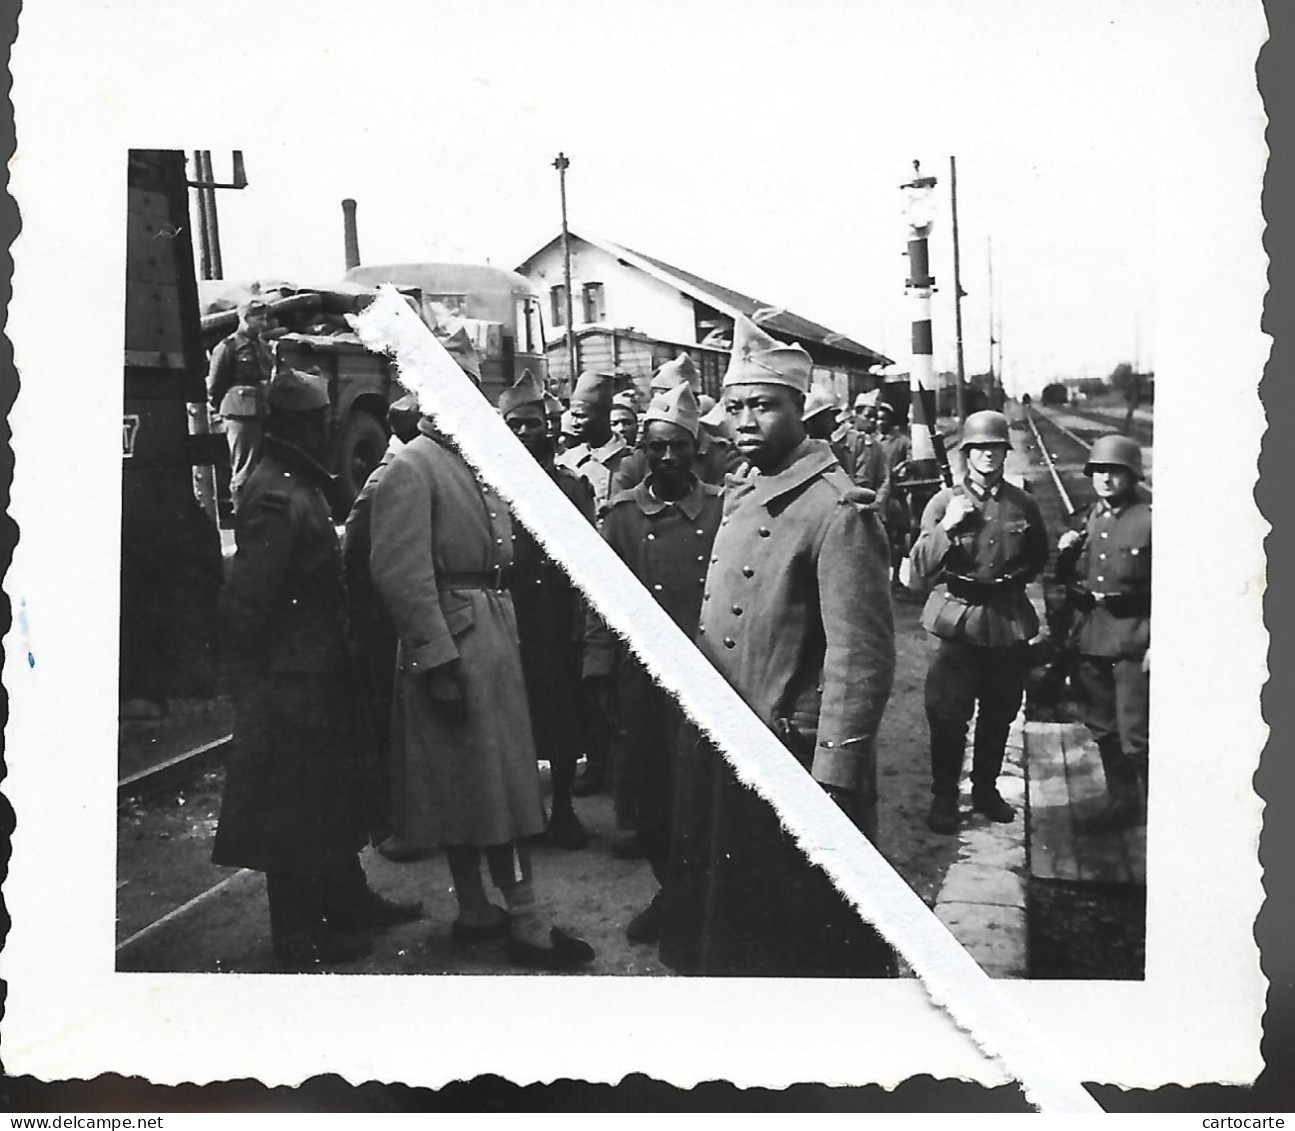 17 144 0424 WW2 WK2 ROYAN ENVIRONS  A SITUER GARE  PRISONNIERS AFICAINS  SOLDATS ALLEMANDS 1940 - War, Military